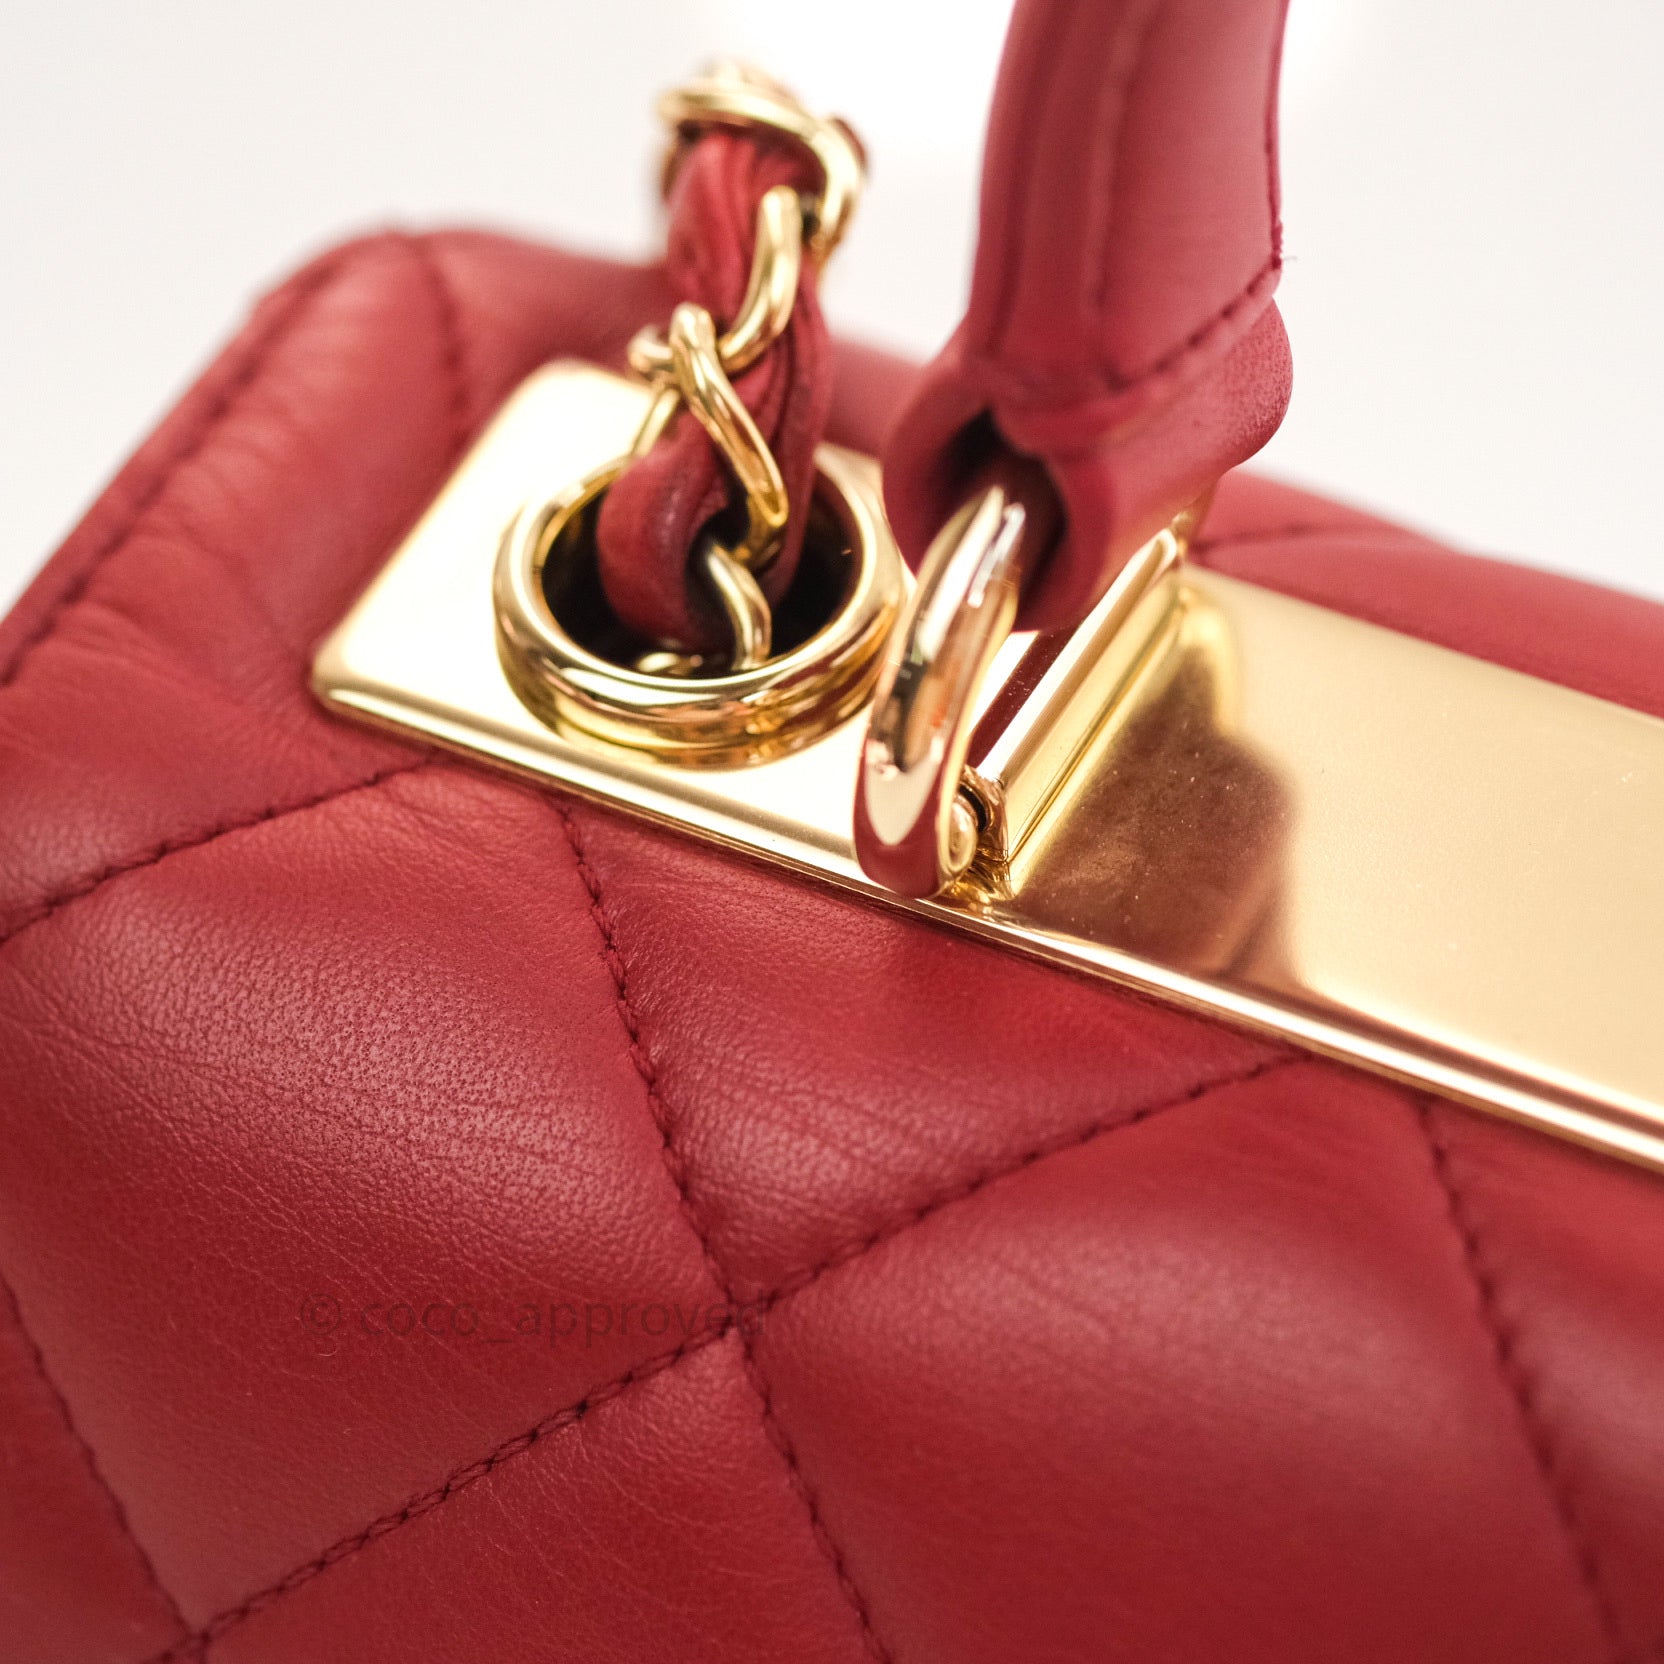 Chanel Red Quilted Lambskin Forever Small Hobo Bag